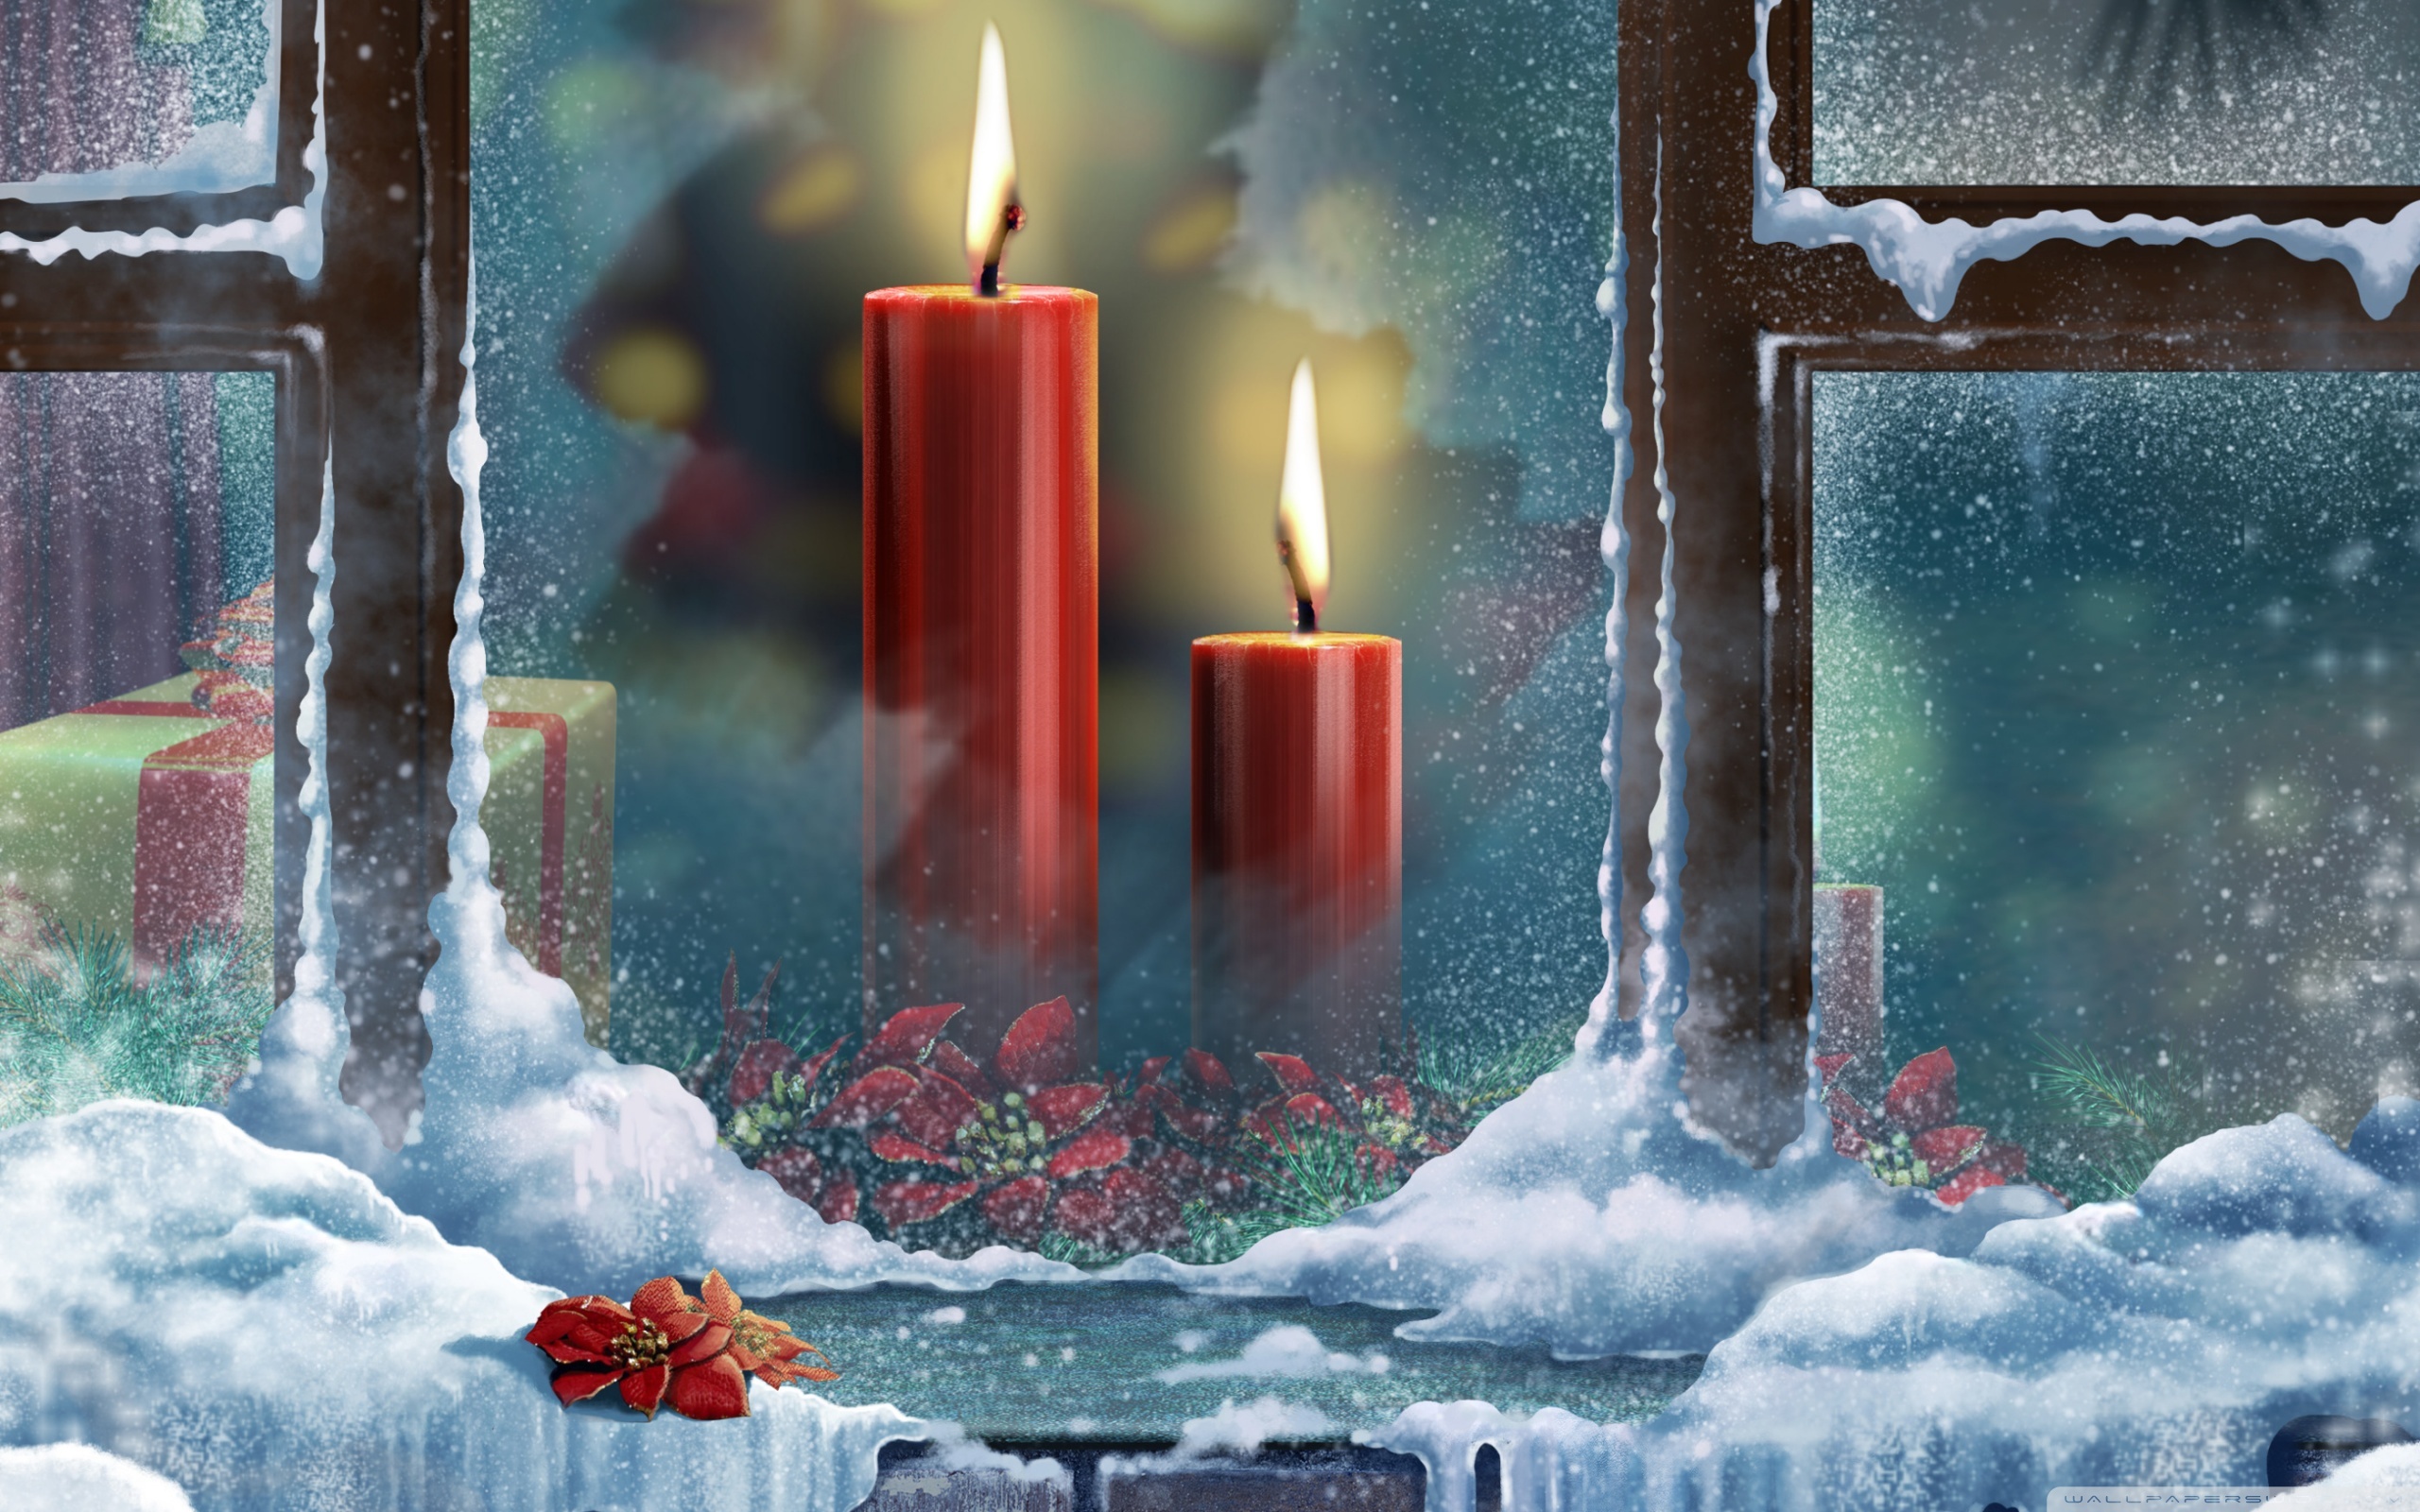 Best Candles wallpapers for phone screen